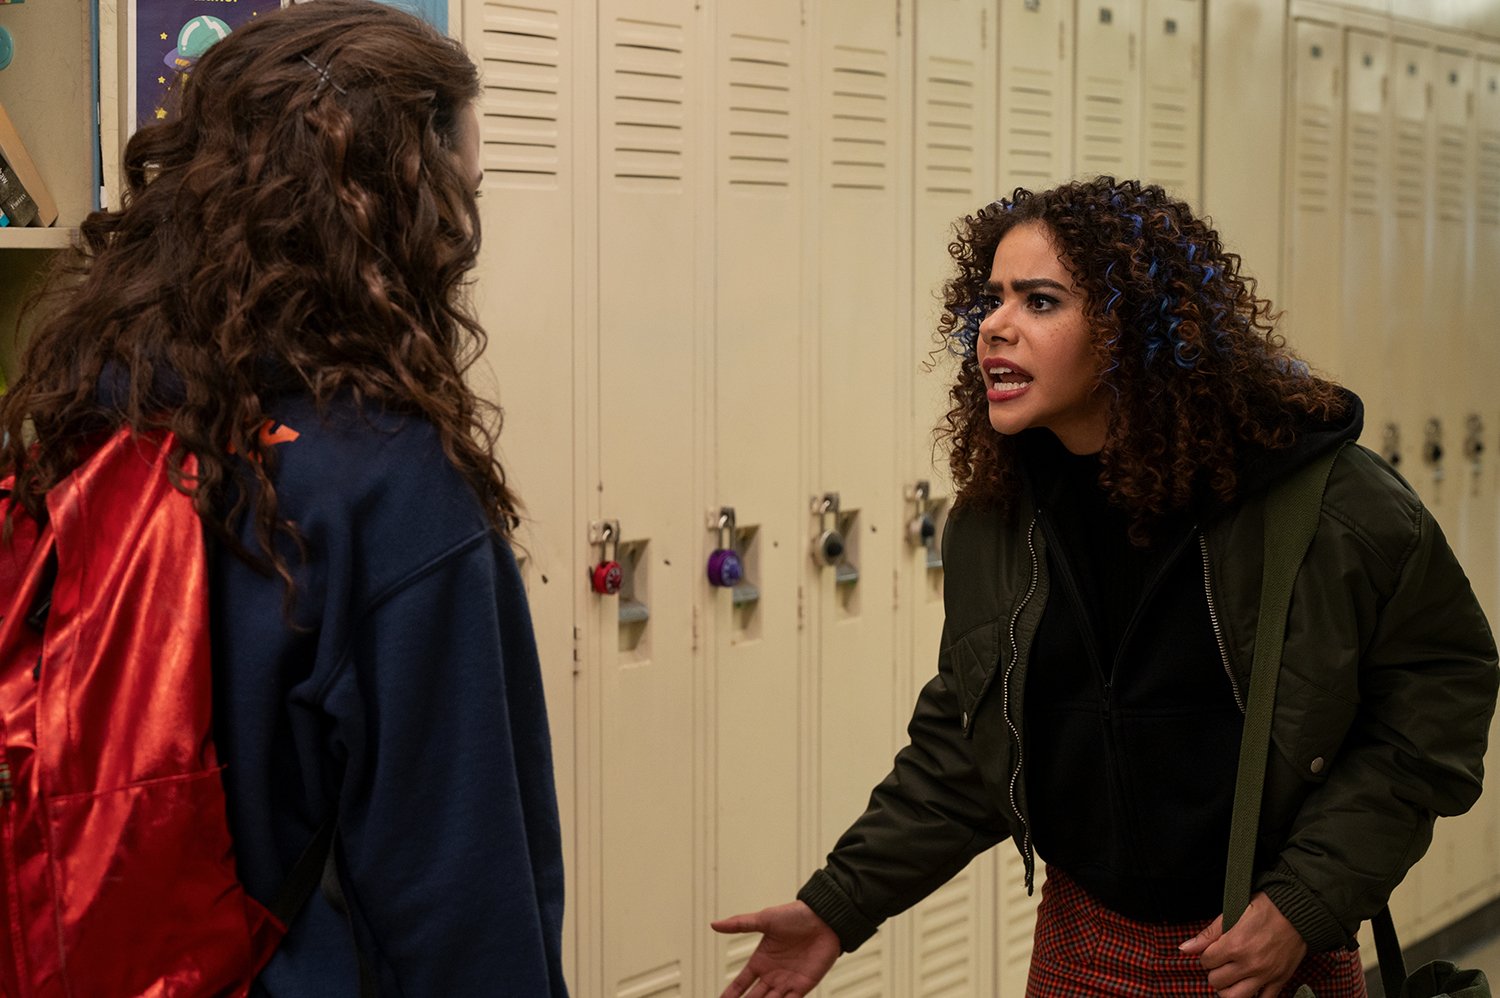 Ginny & Georgia Season 2: Sara Waisglass as Max and Anotina Gentry as Ginny yell at each other in a school hallway.